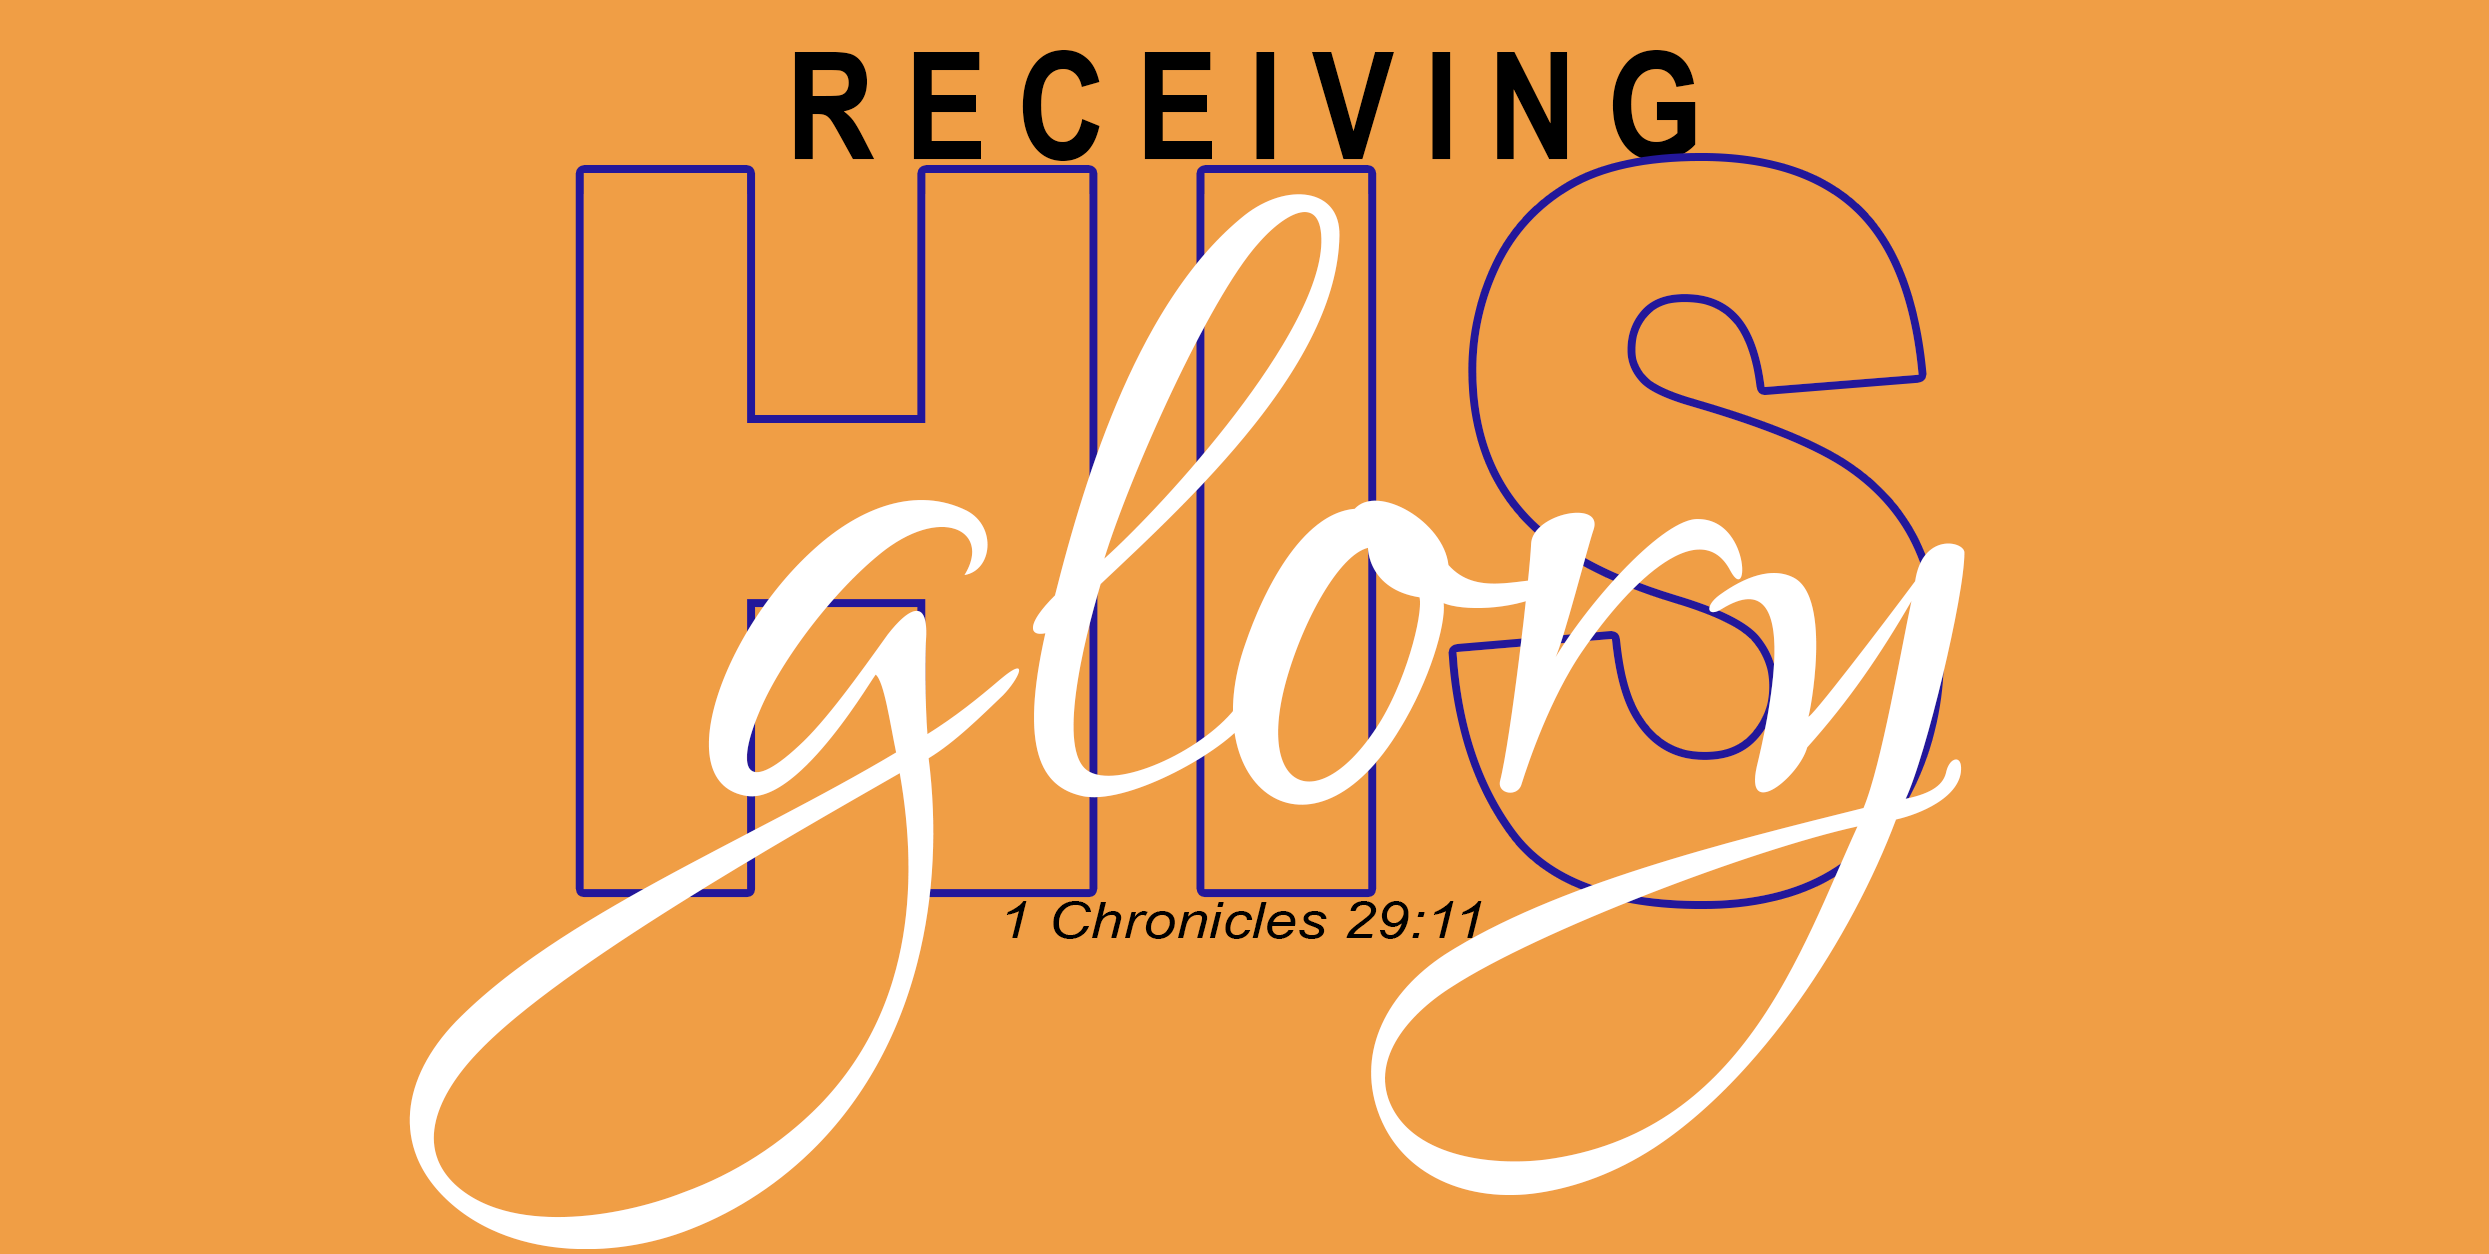 Receiving His Glory! - 1 Chronicles 29:11